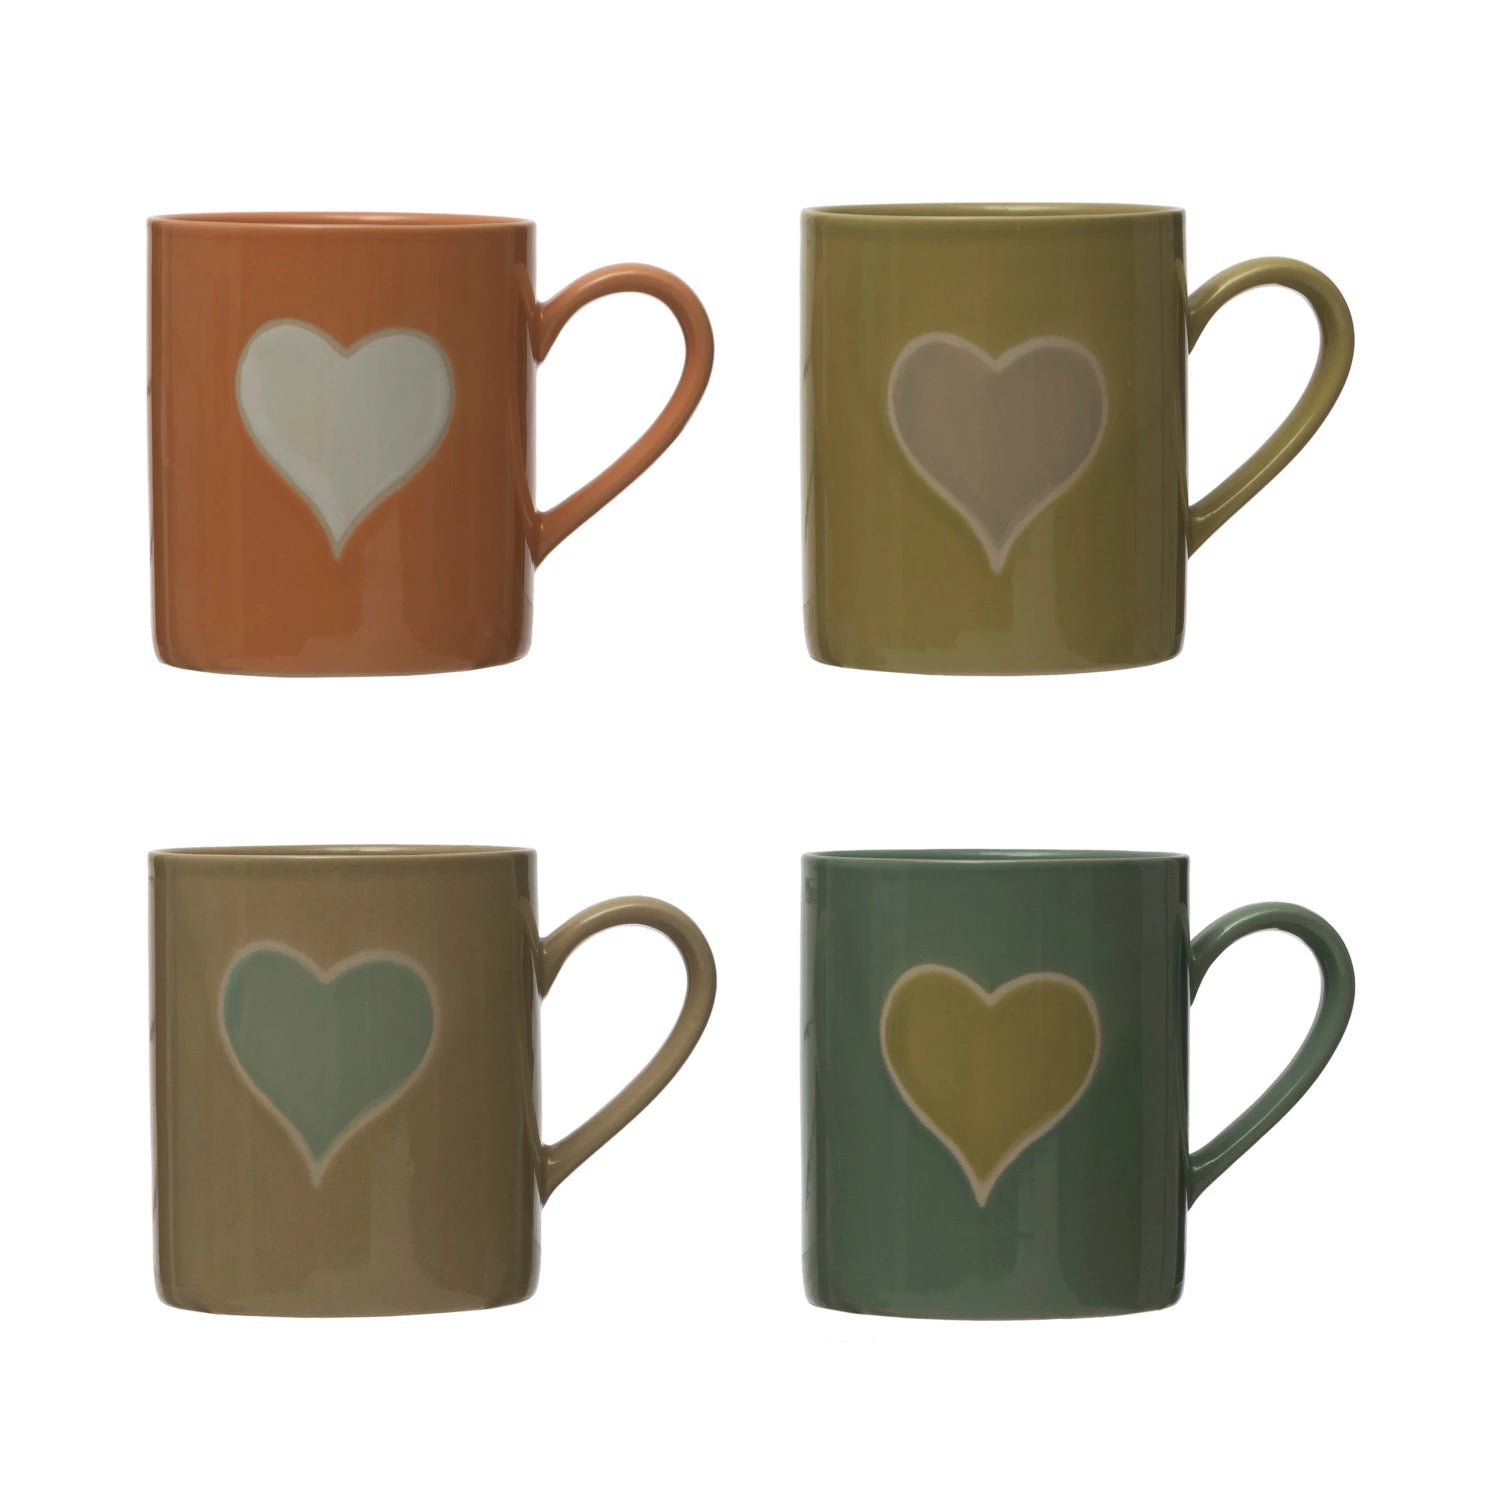 all four colors of handmade stoneware mugs displayed against a white background